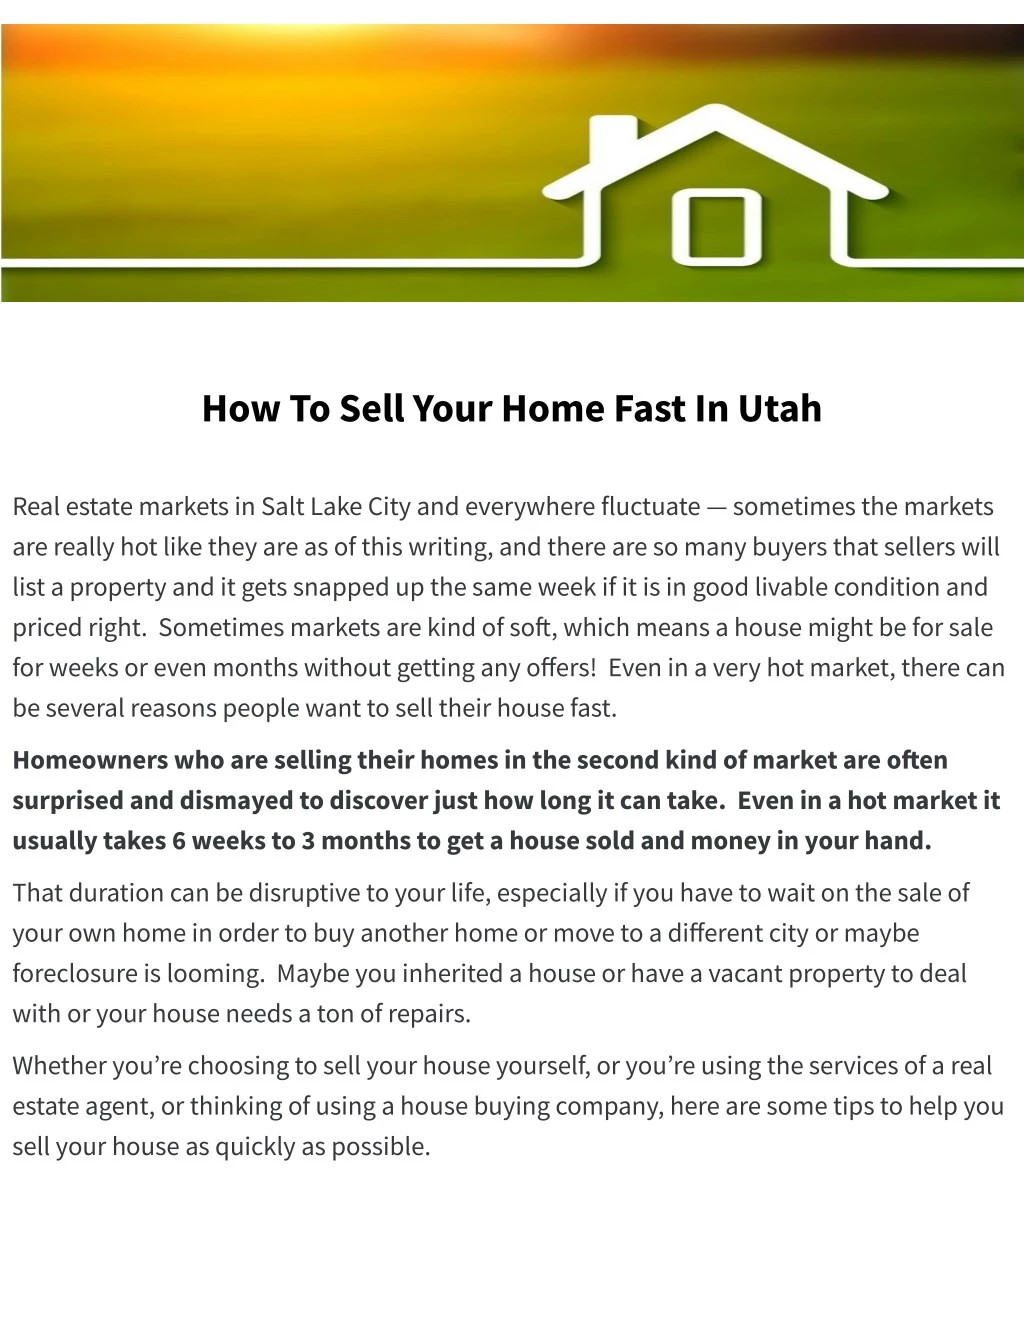 how to sell your home fast in utah